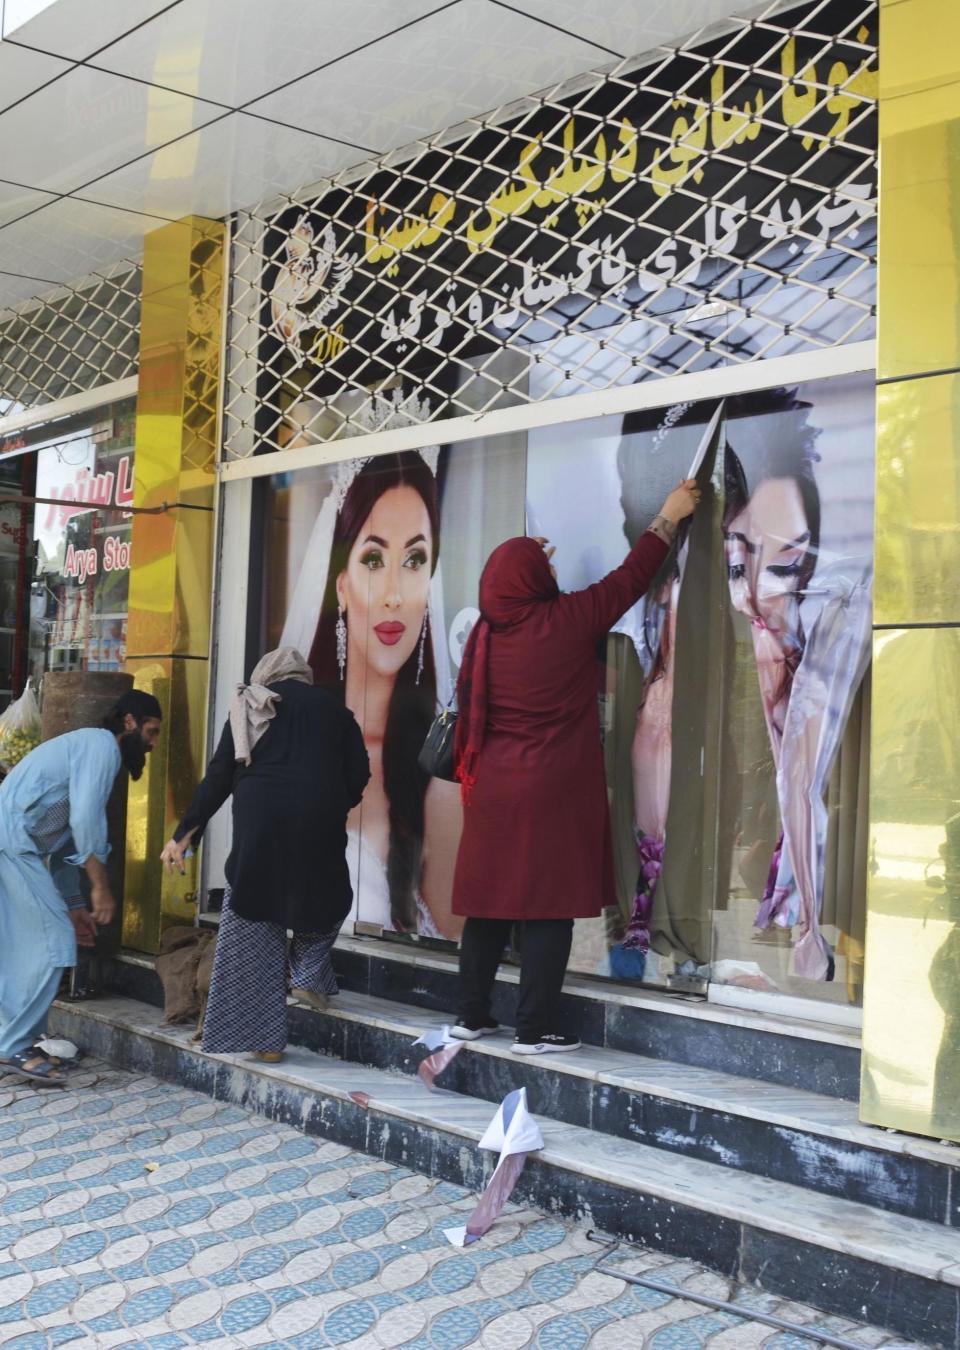 Workers at a beauty salon strip large photos of women off the wall in Kabul